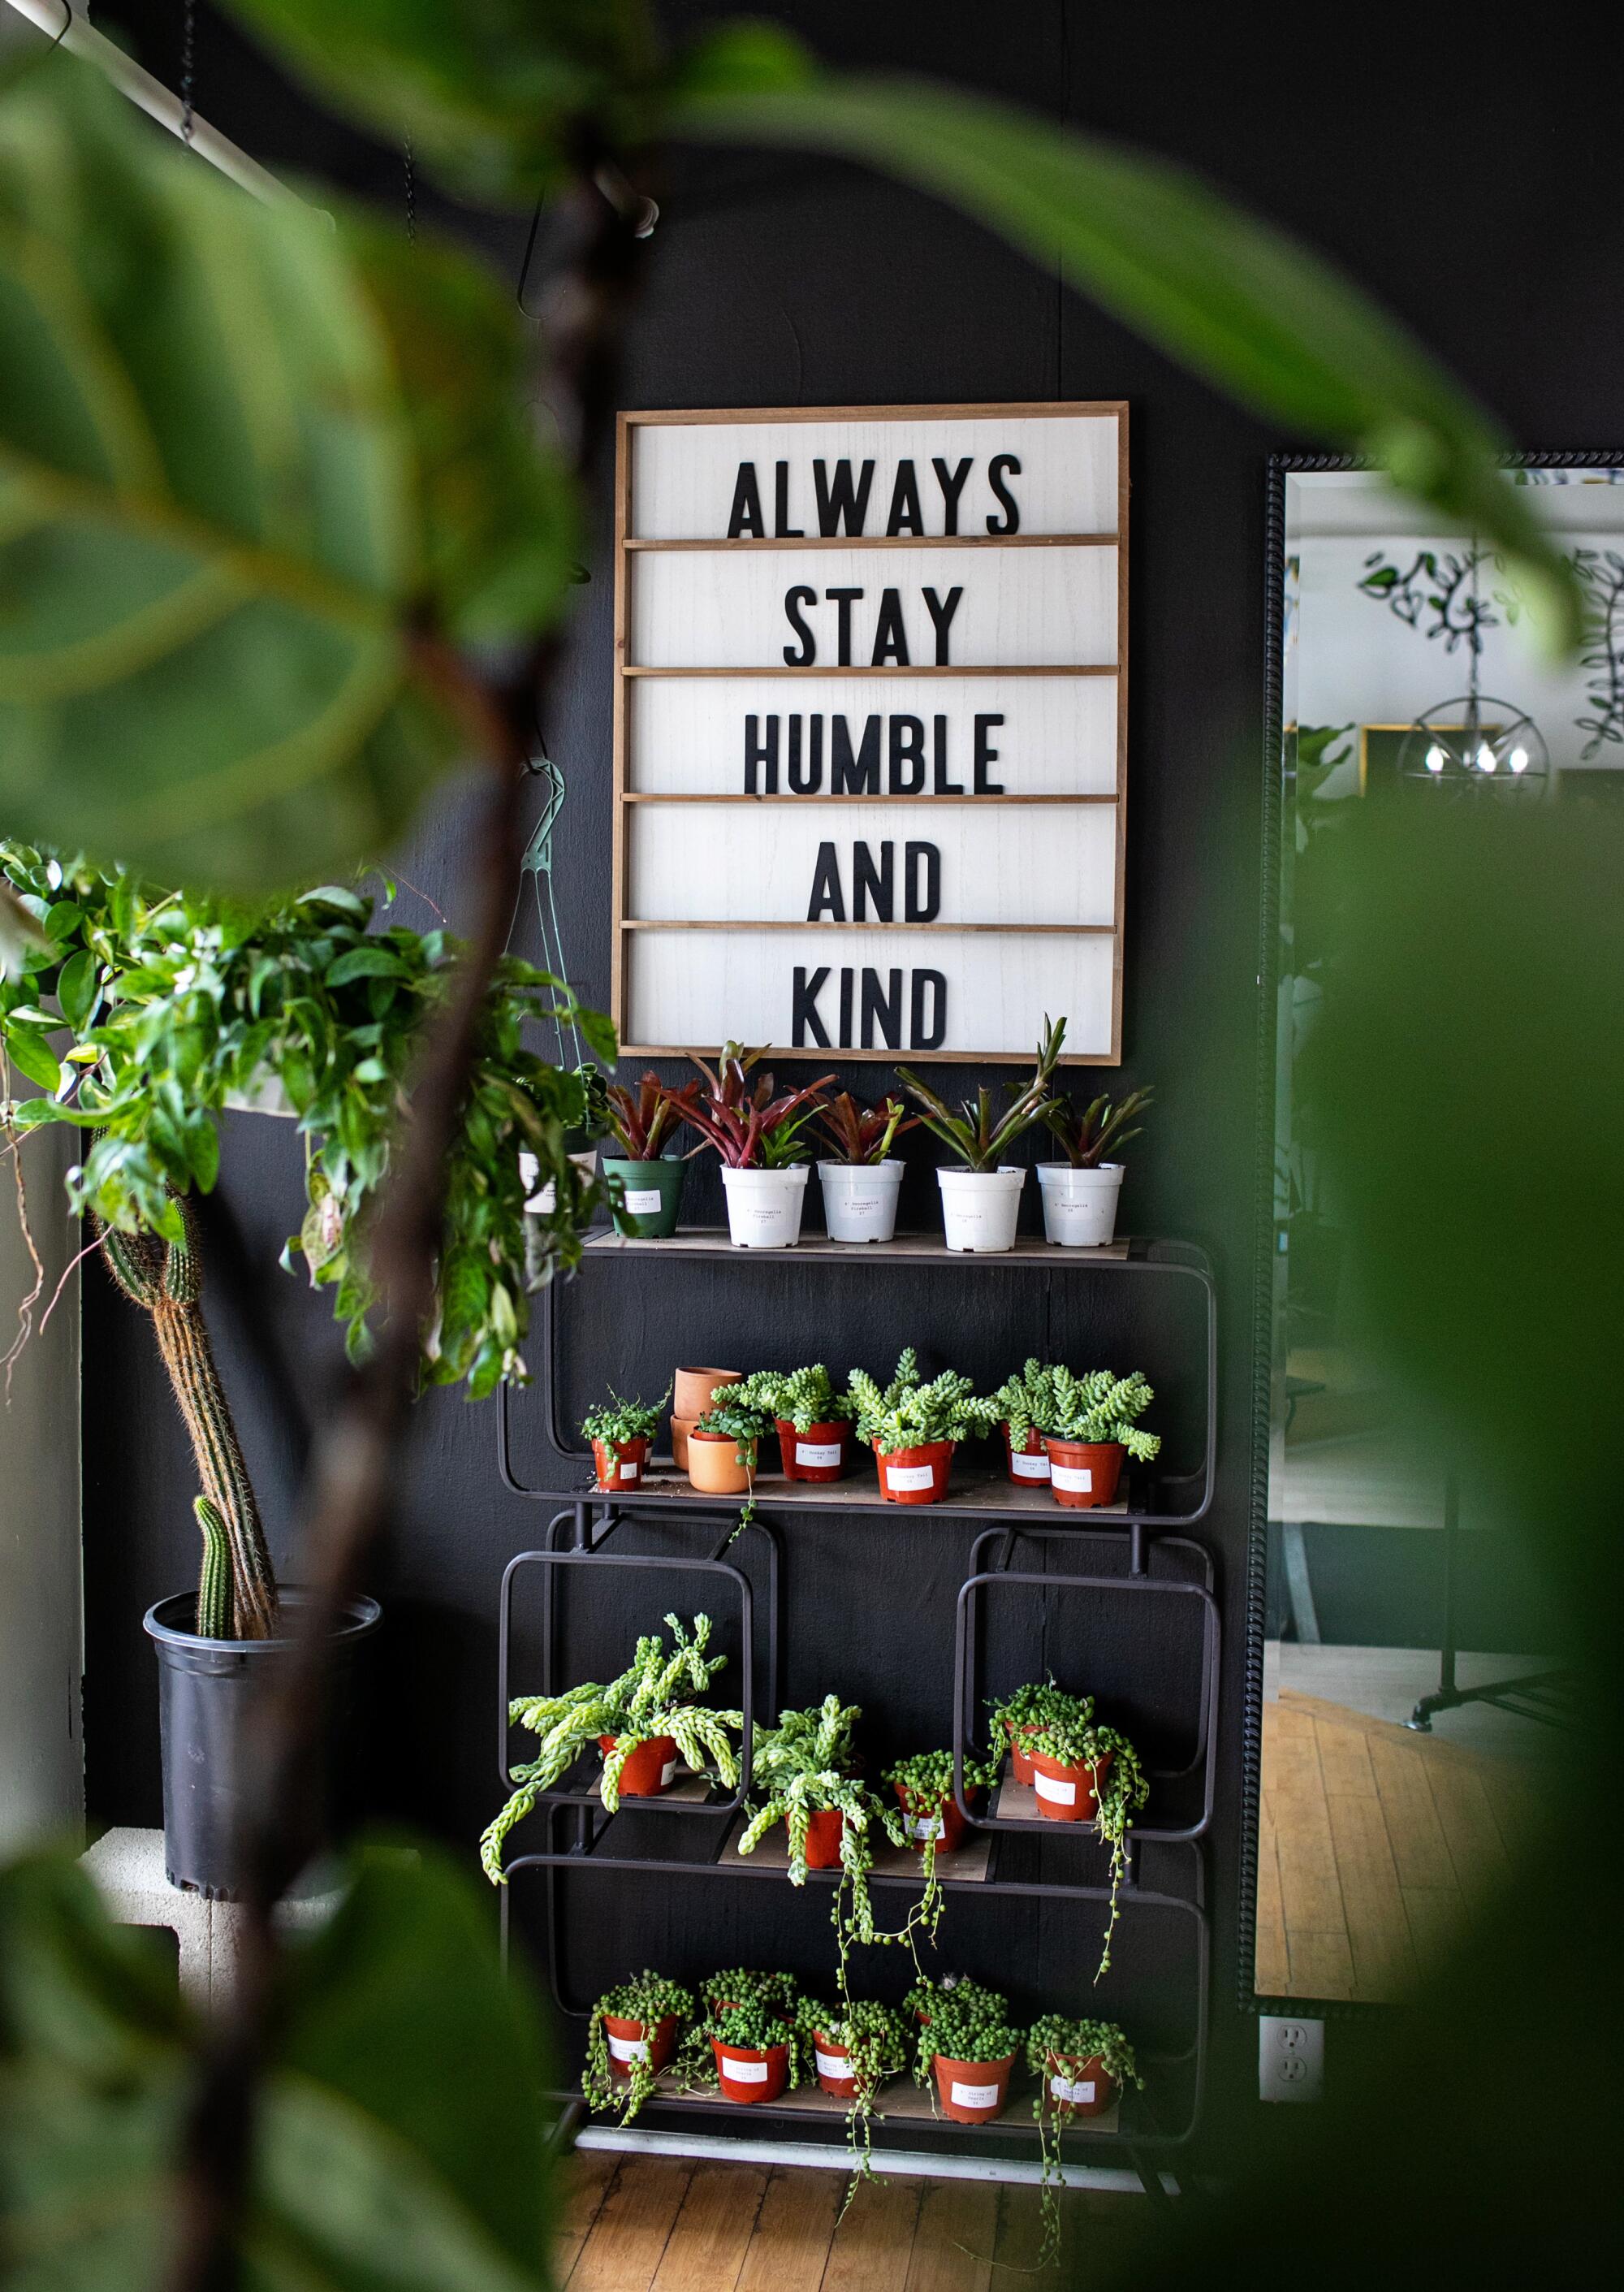 A sign reading "always stay humble and kind" hangs on a wall surrounded by potted plants indoors.